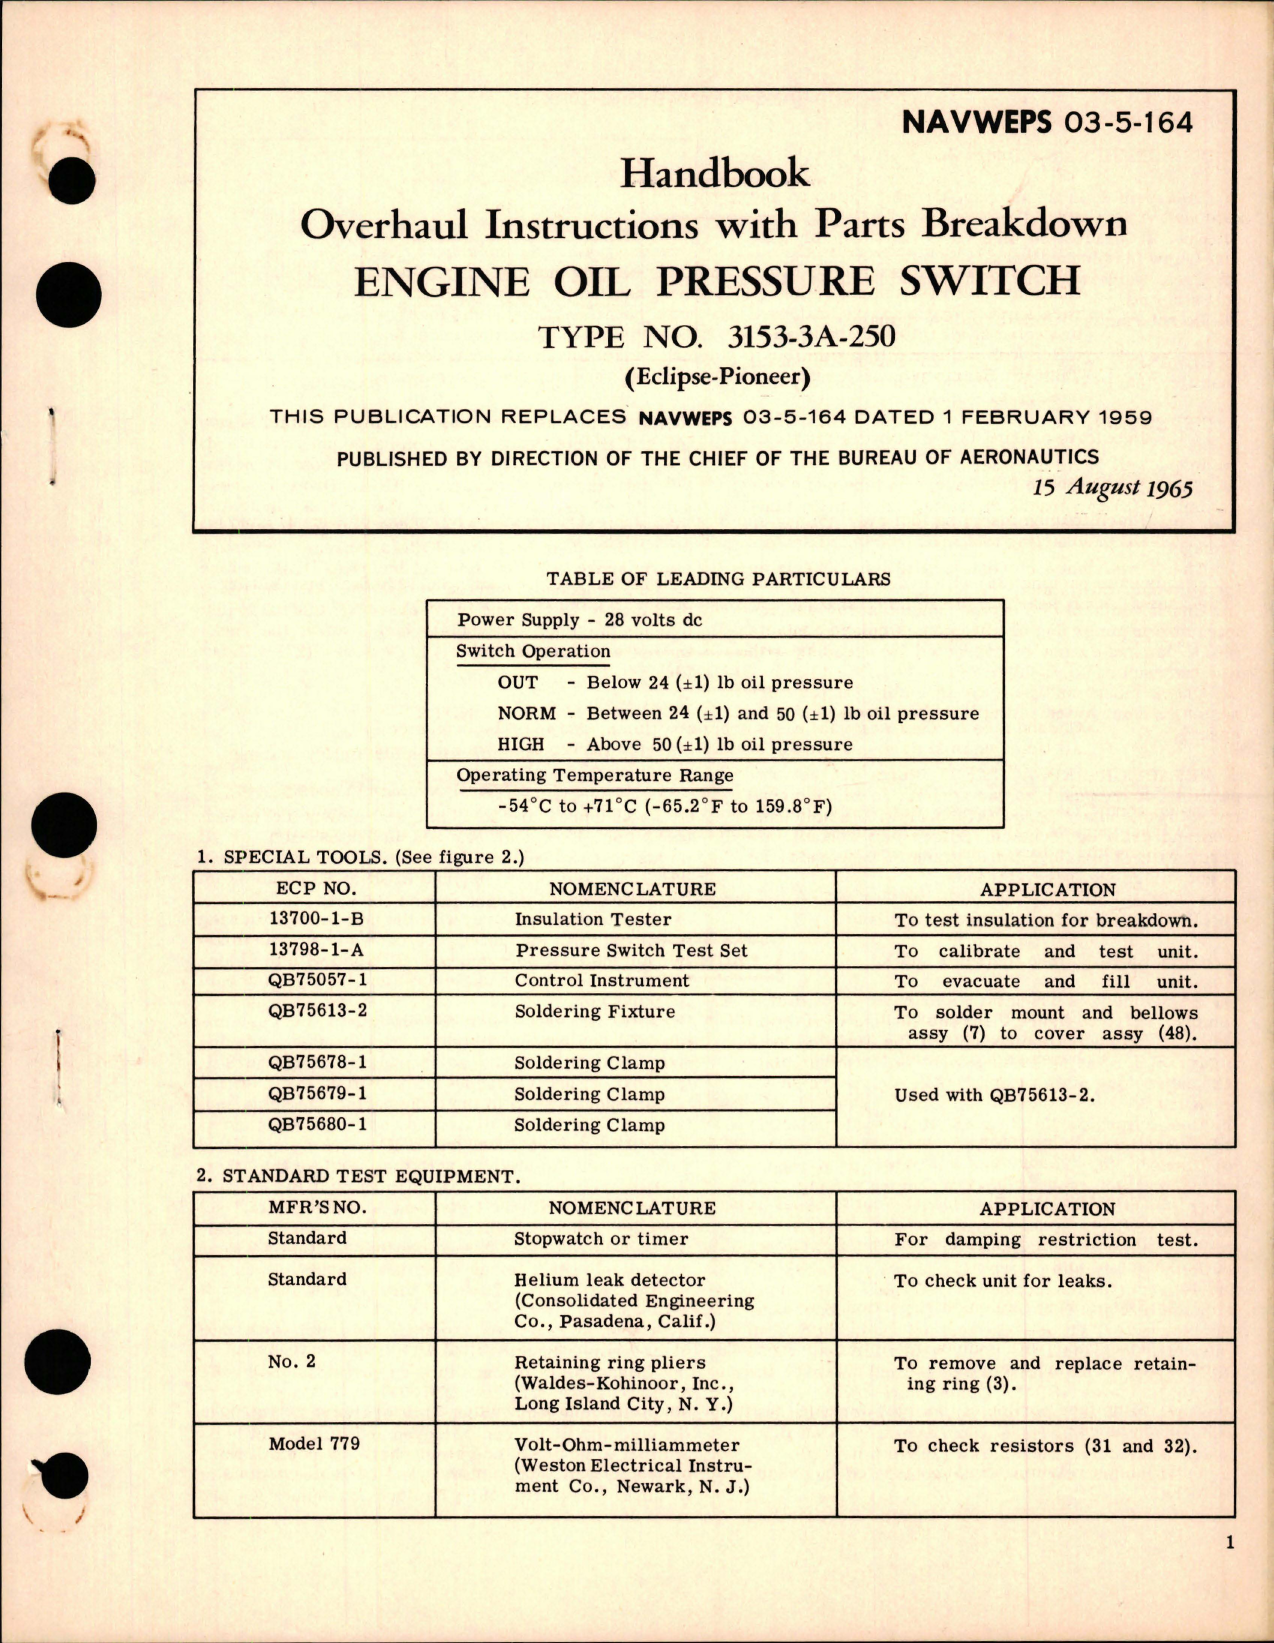 Sample page 1 from AirCorps Library document: Overhaul Instructions with Parts Breakdown for Engine Oil Pressure Switch - Type 3153-3A-250 